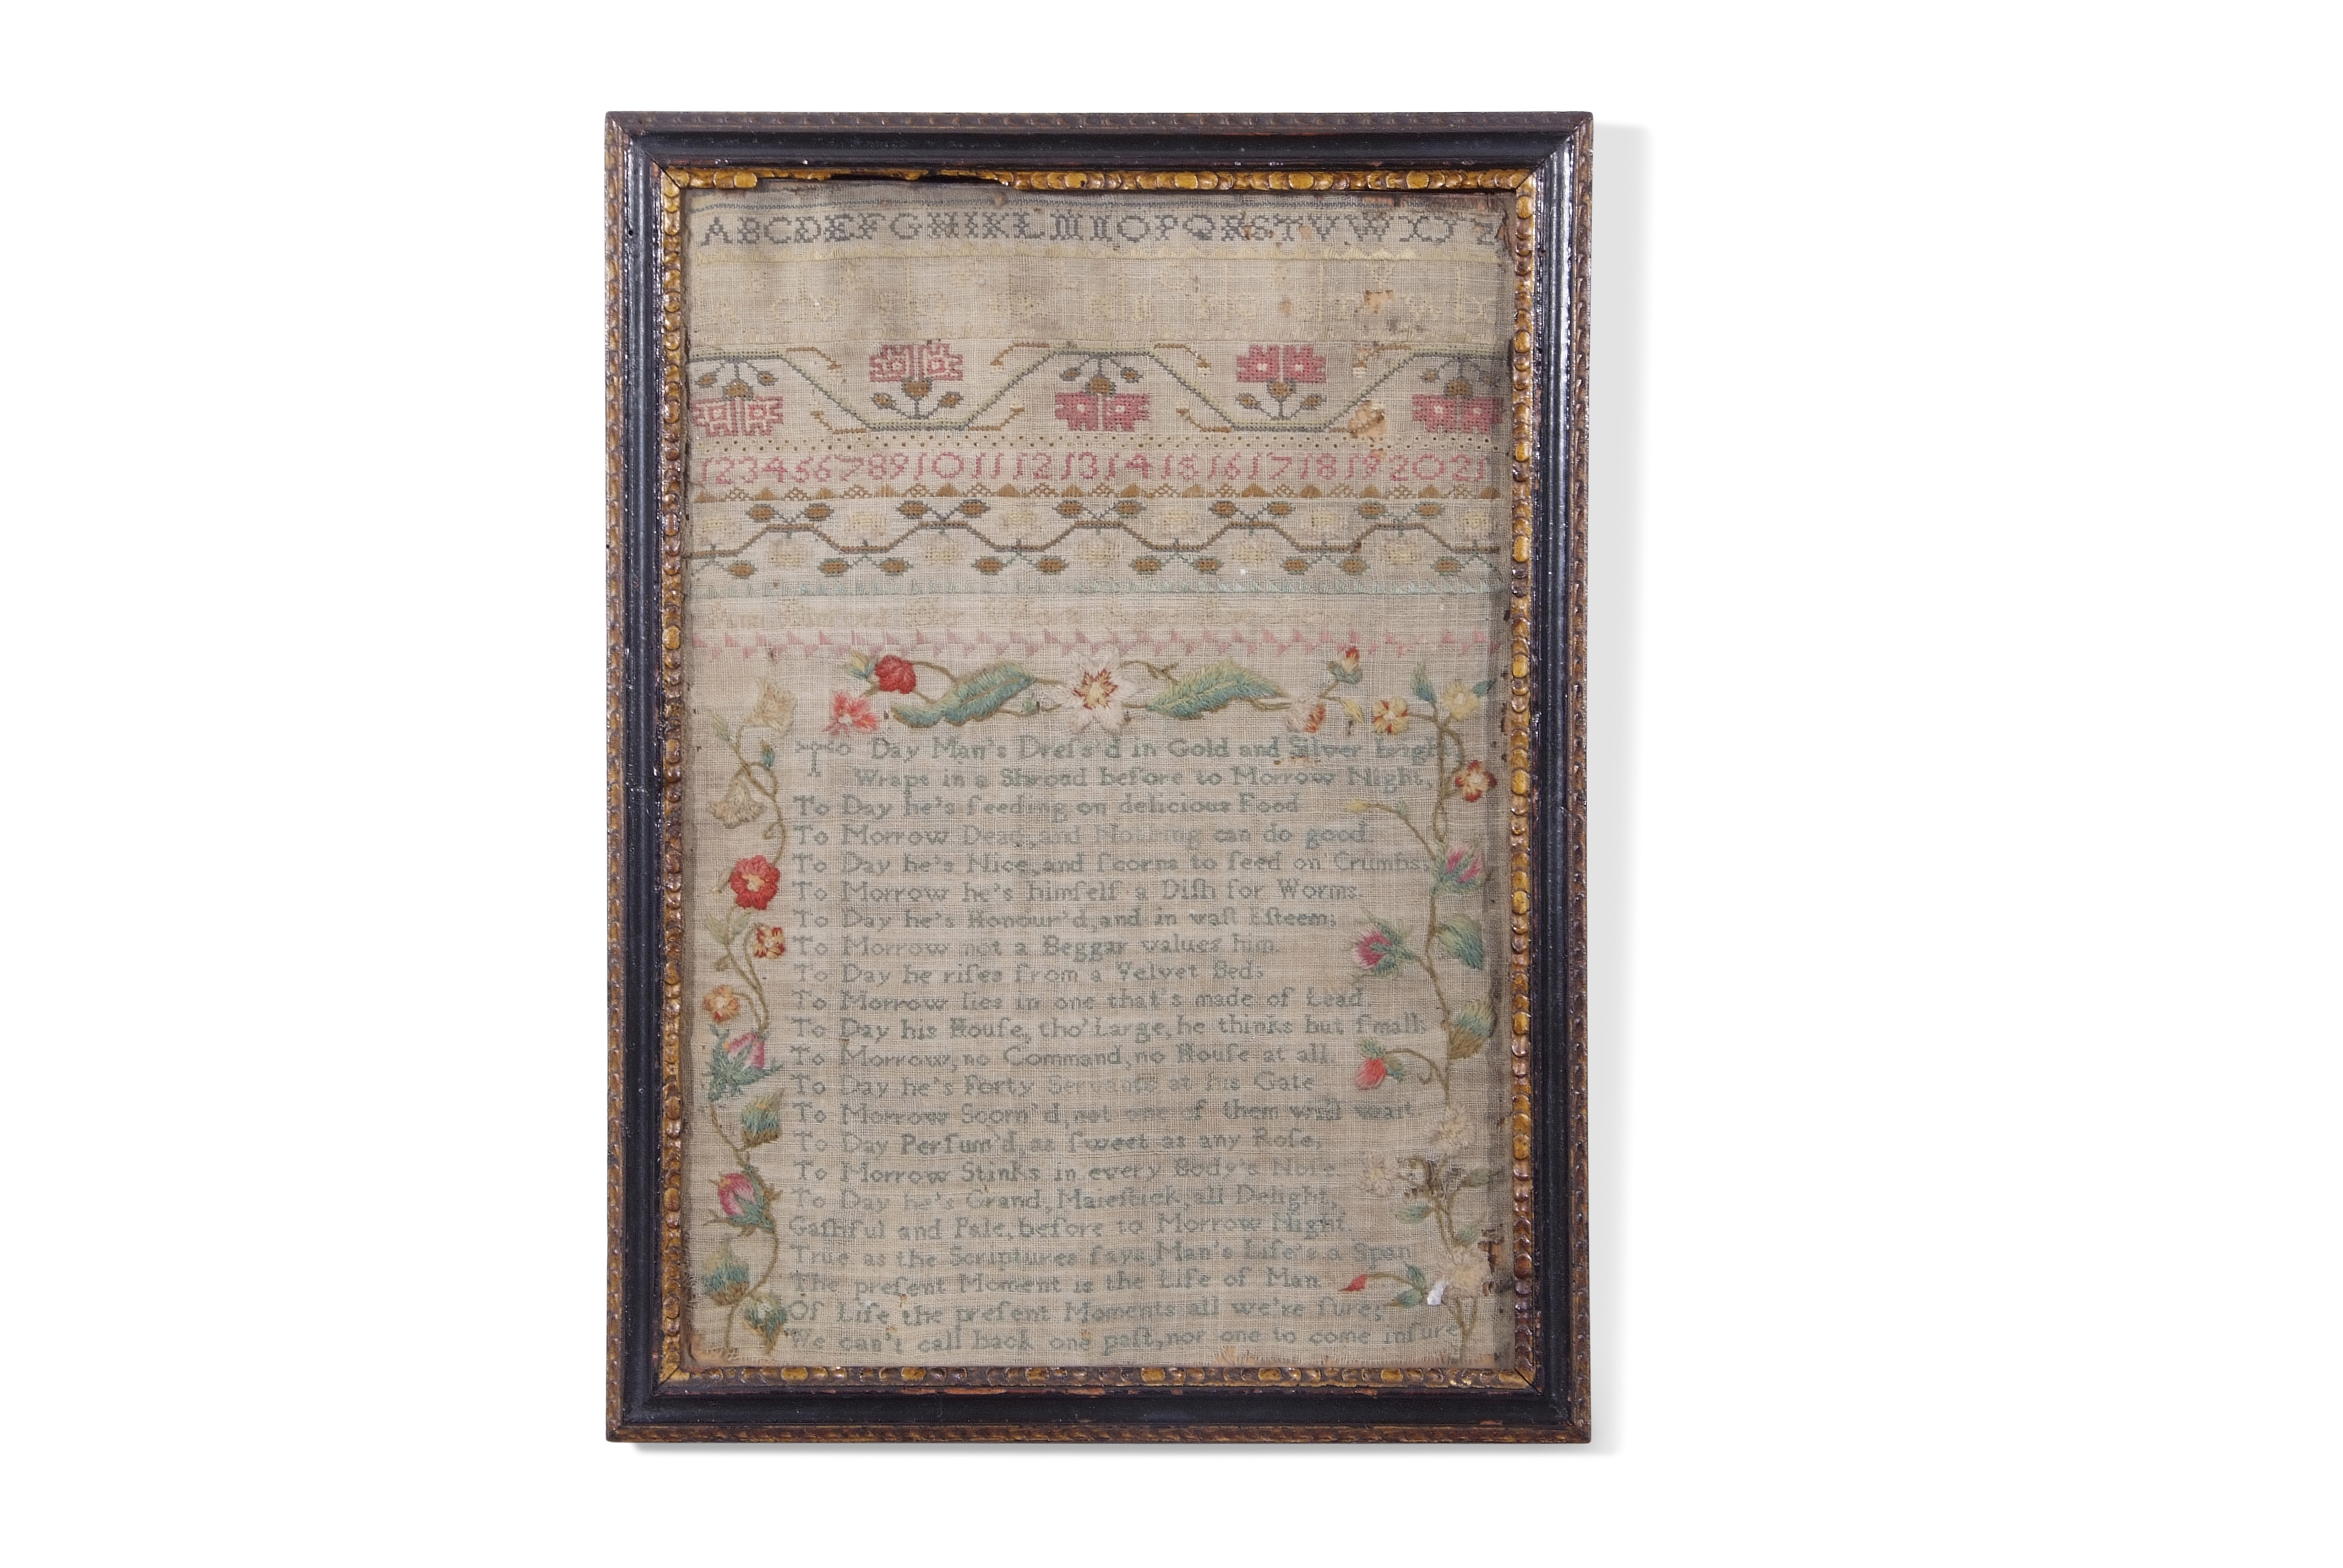 19th century needlework sampler decorated with rows of letters and numbers and an extensive text